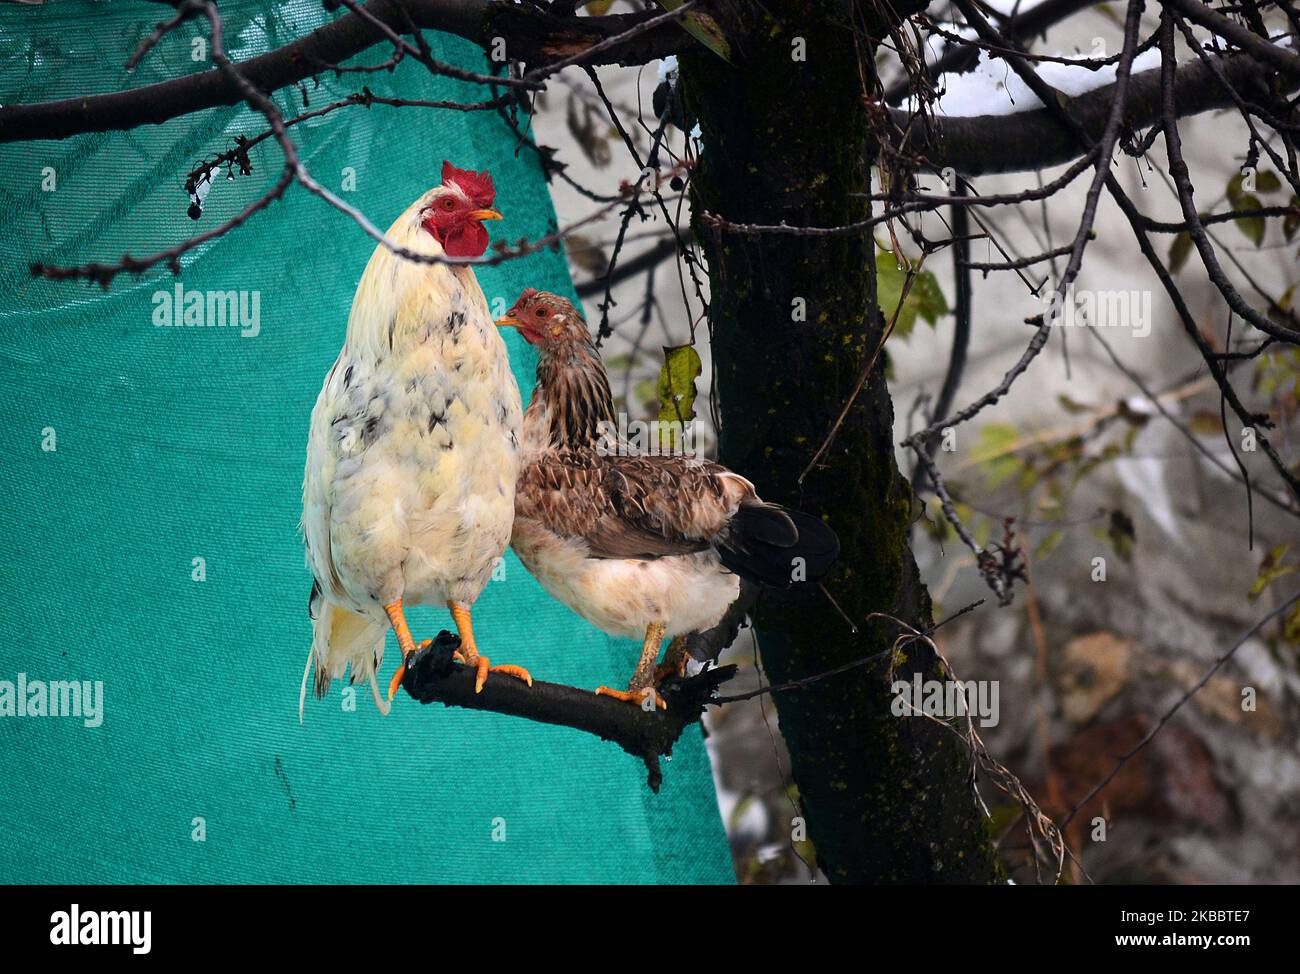 A rooster rests on the tree branch after a fresh spell of snowfall on the outskirts of Srinagar, Kashmir on November 28, 2019. The preparations by the nomadic tribe is in full swing for the upcoming harsh winter season across the Kashmir. Uncertainty continues across Kashmir valley after India revoked Article 370 of its constitution which granted Kashmir autonomy. (Photo by Faisal Khan/NurPhoto) Stock Photo